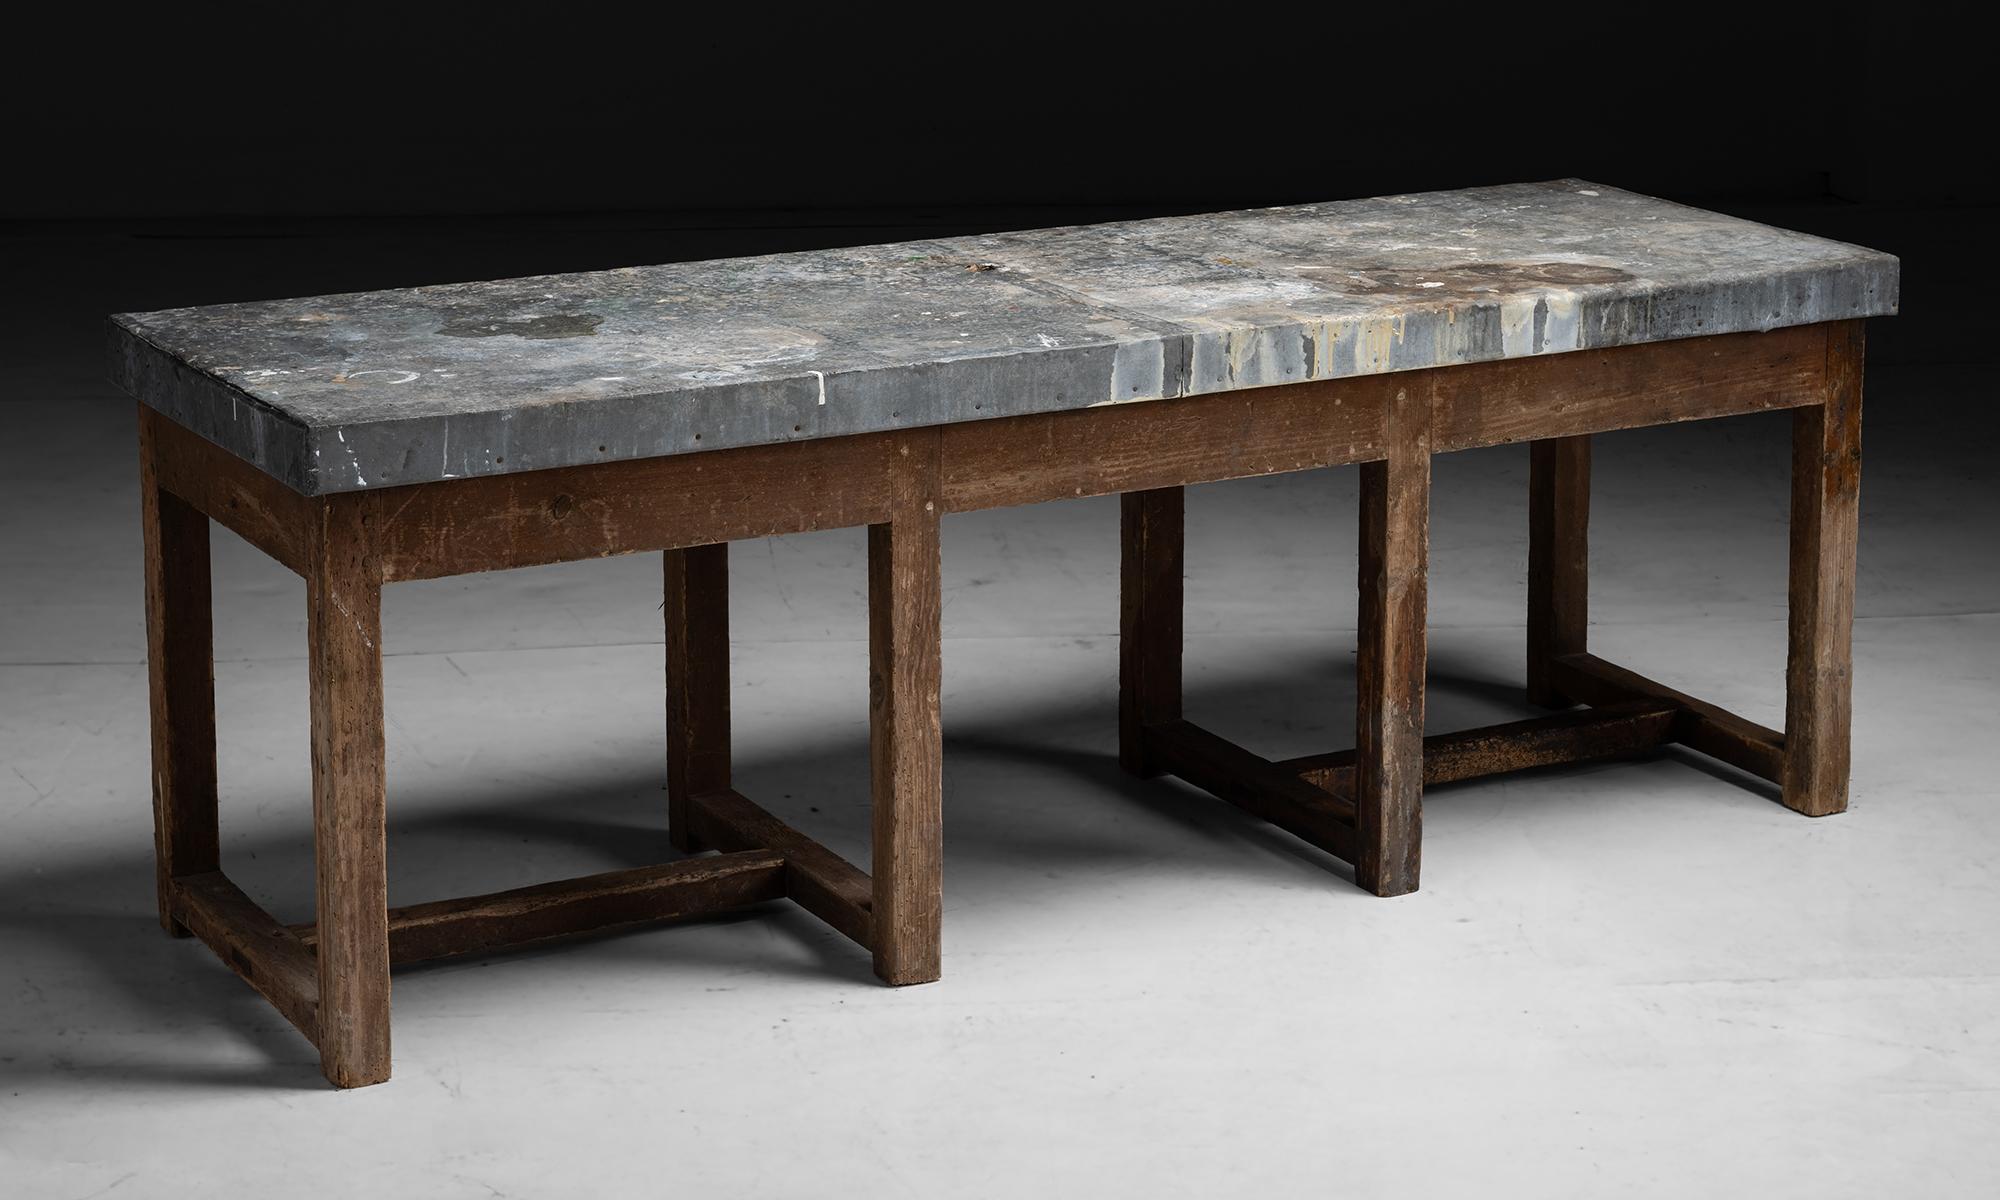 Zinc Work Table

France Circa 1920

Zinc wrapped top with natural patina on eight leg pine base.

79”L x 26”d x 28”h

Ref. TABLE1147